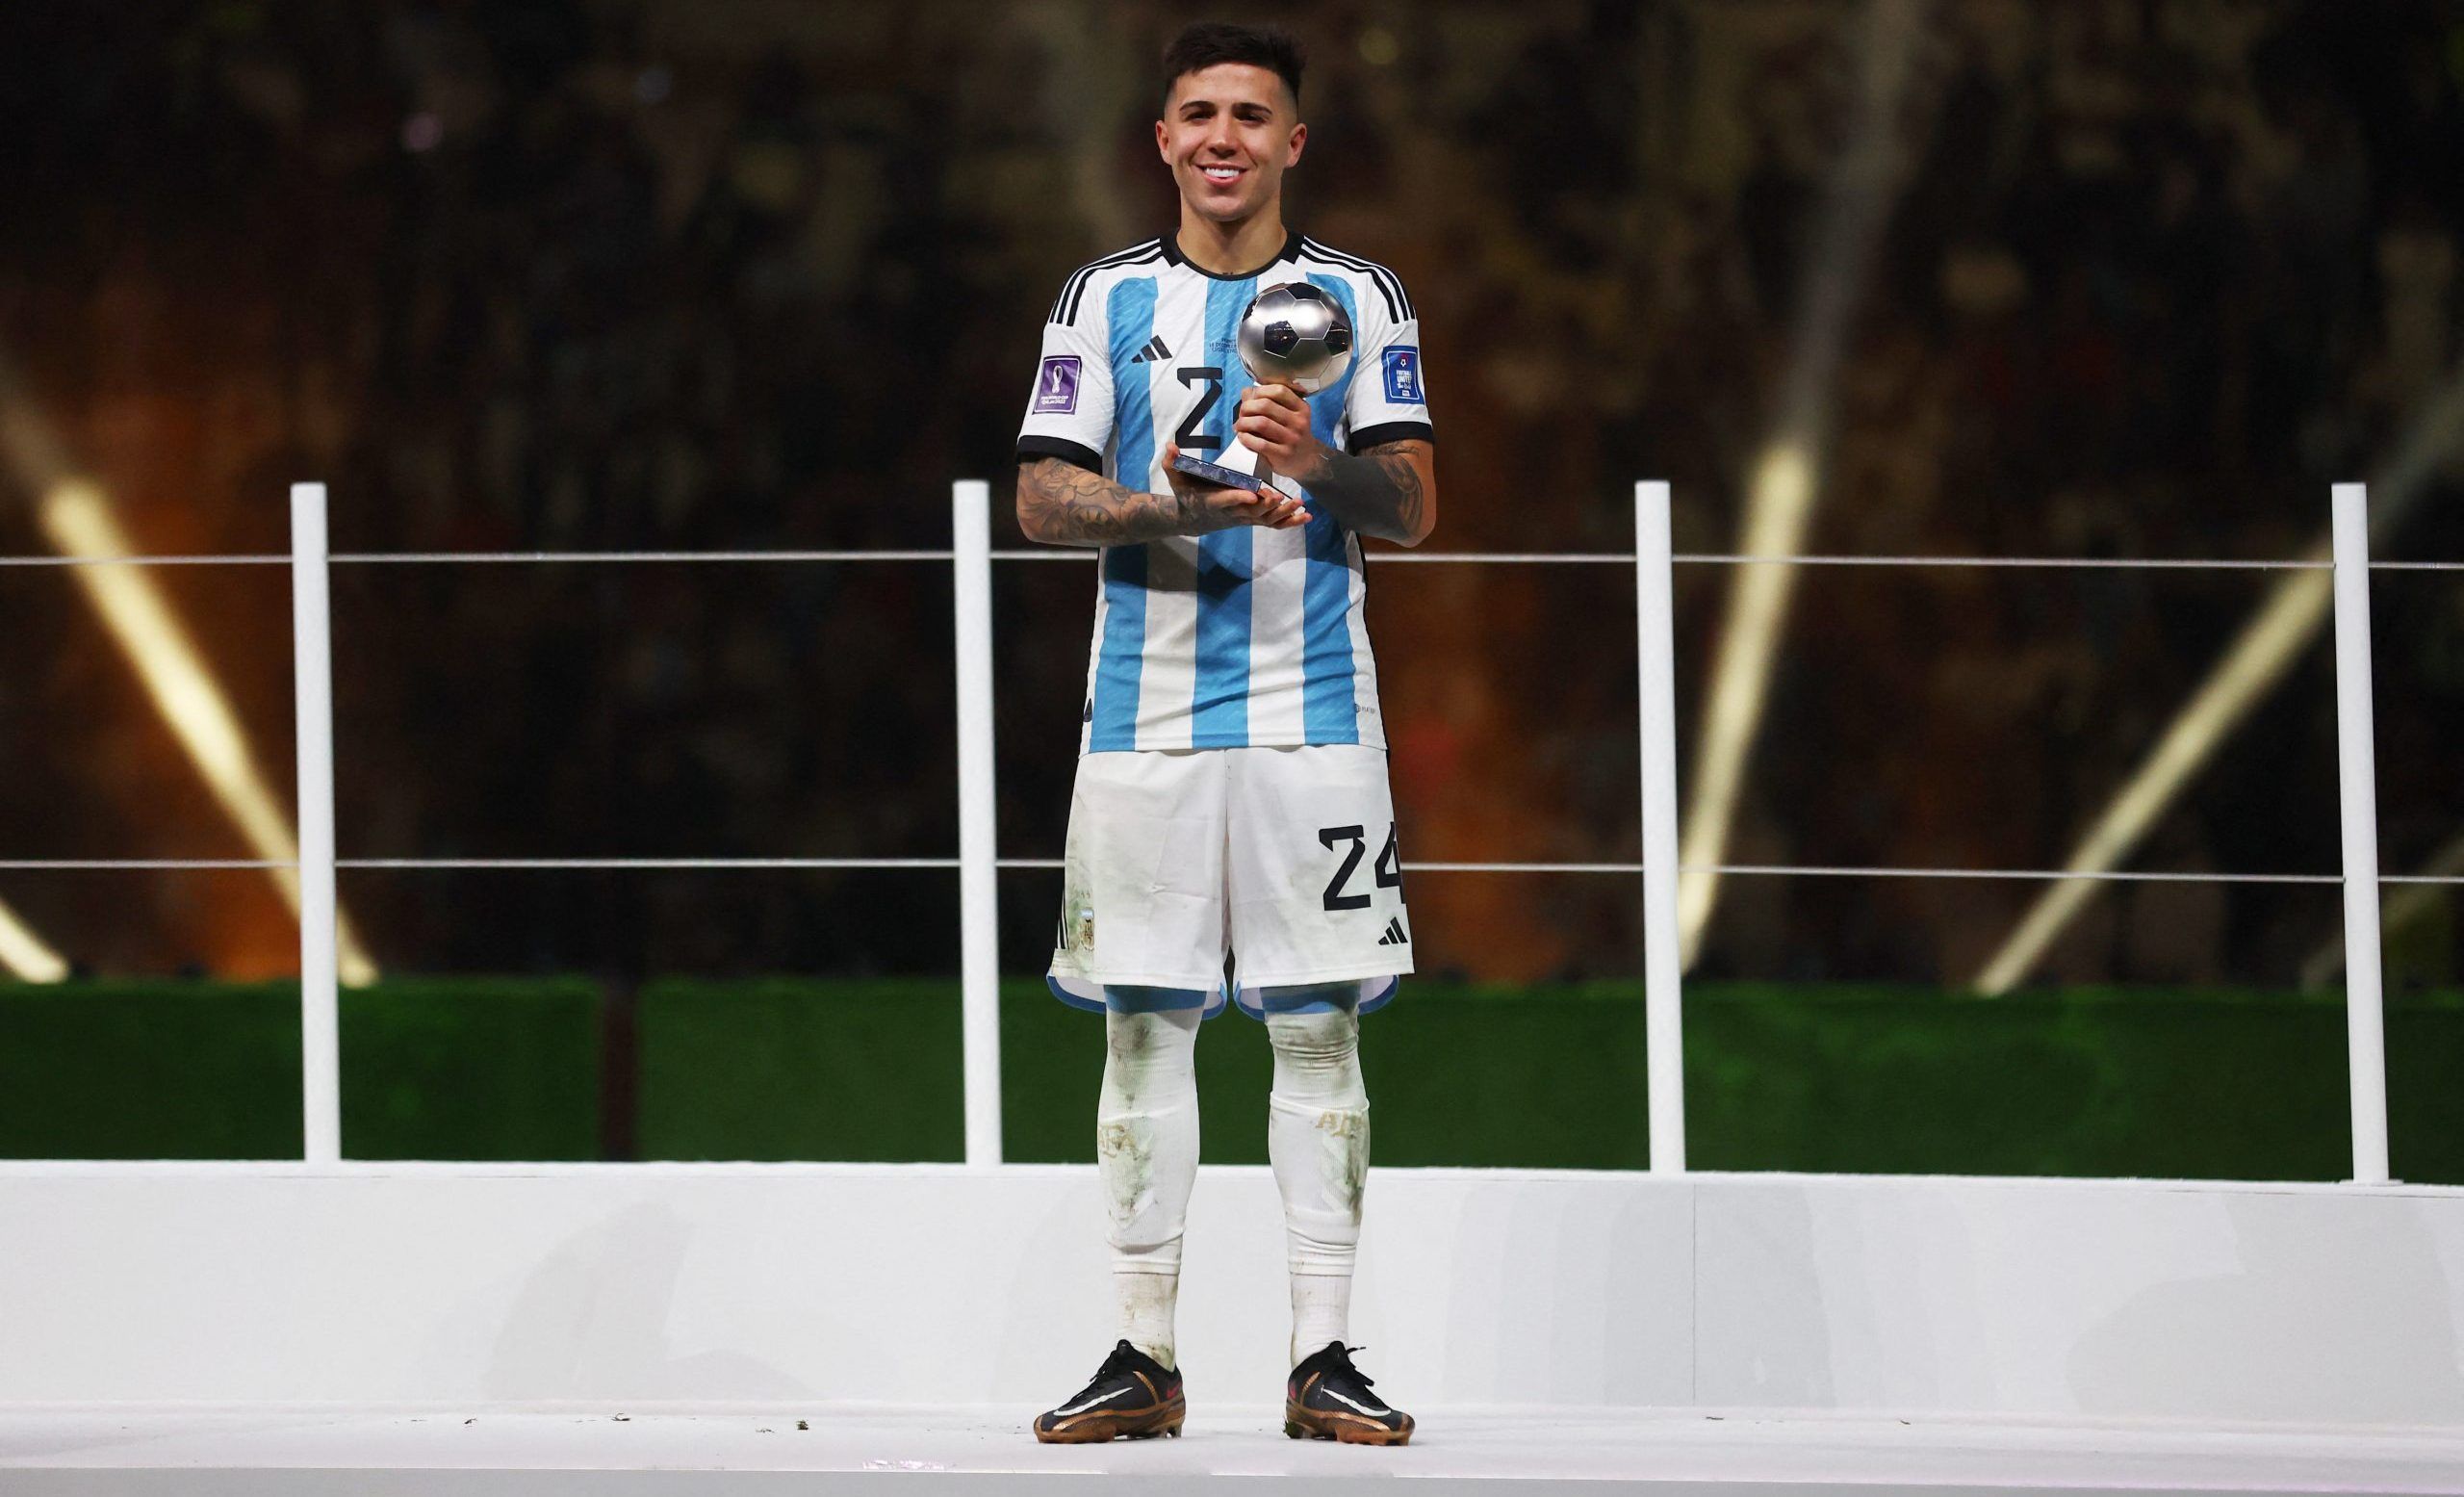 Soccer Football - FIFA World Cup Qatar 2022 - Final - Argentina v France - Lusail Stadium, Lusail, Qatar - December 18, 2022 Argentina's Enzo Fernandez pose with the Best Young Player award REUTERS/Carl Recine